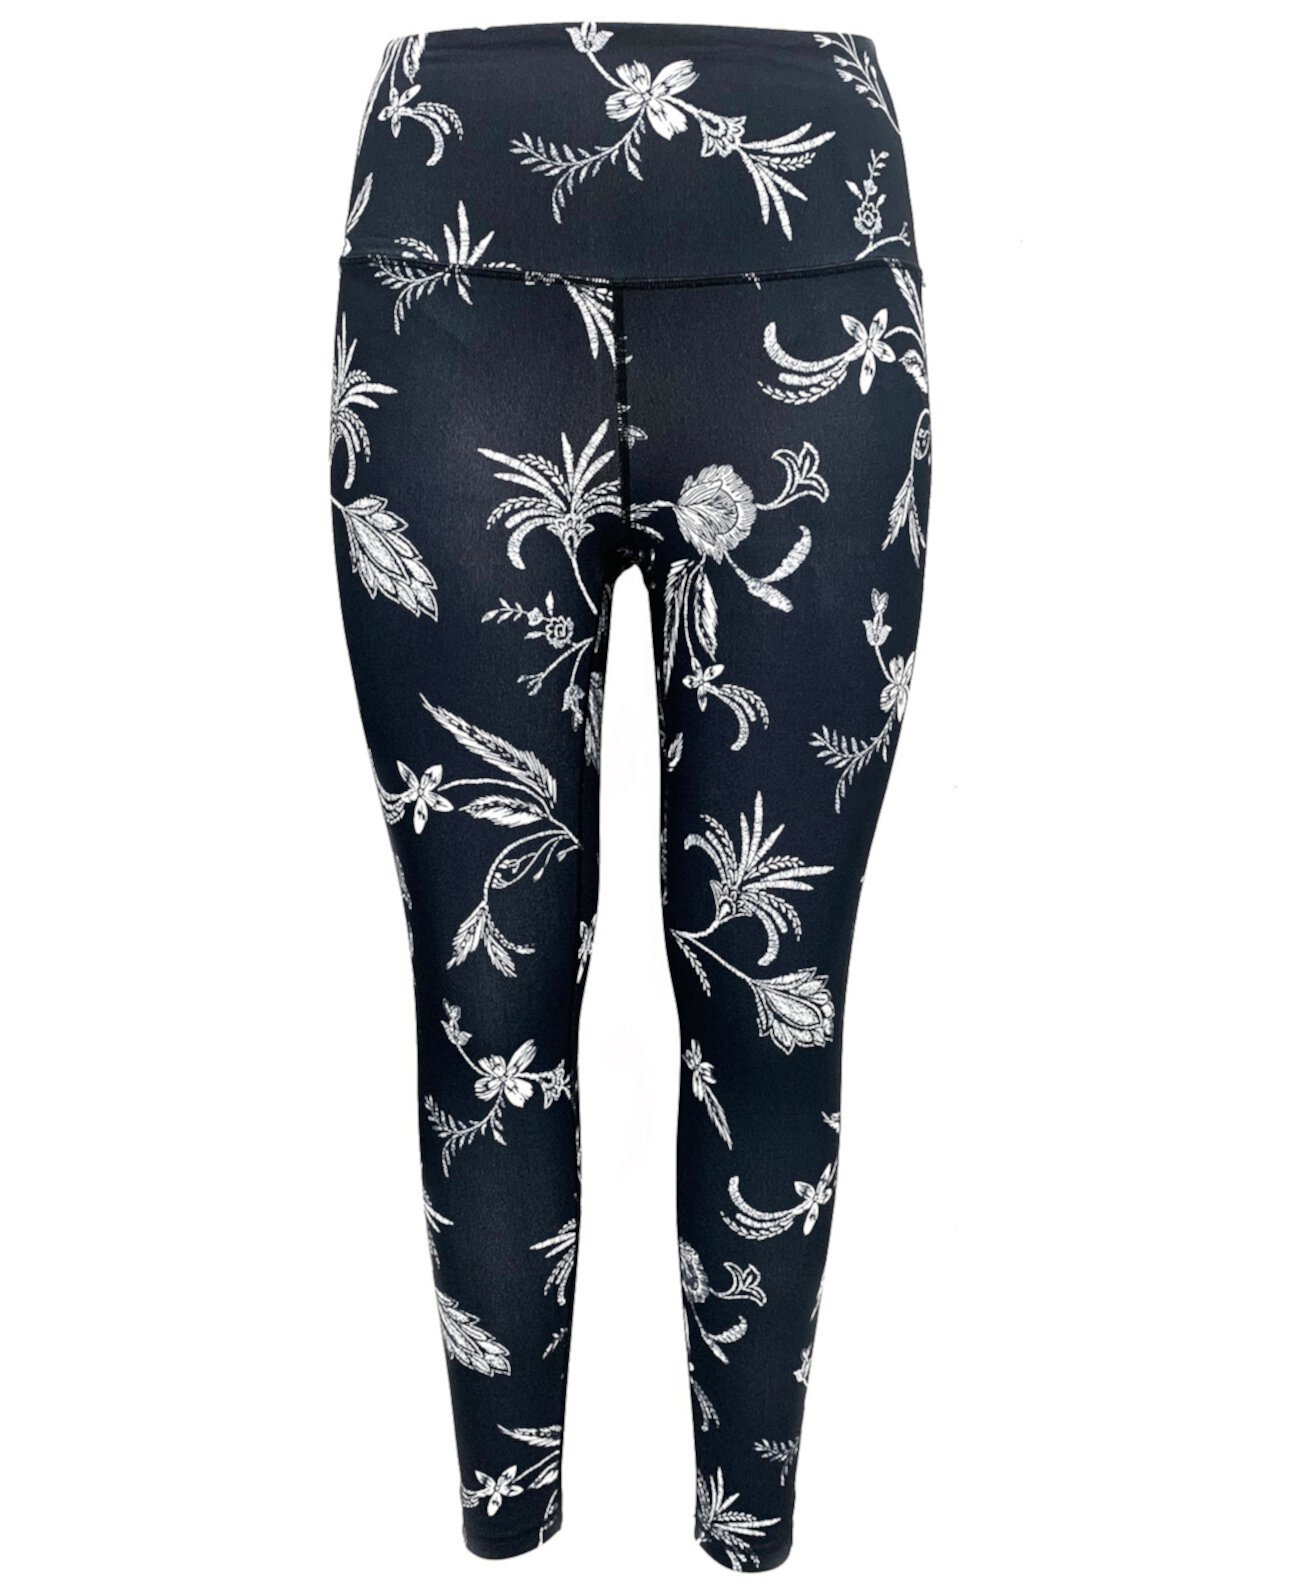 Floral-Print Pocket Leggings, Created for Macy's Ideology